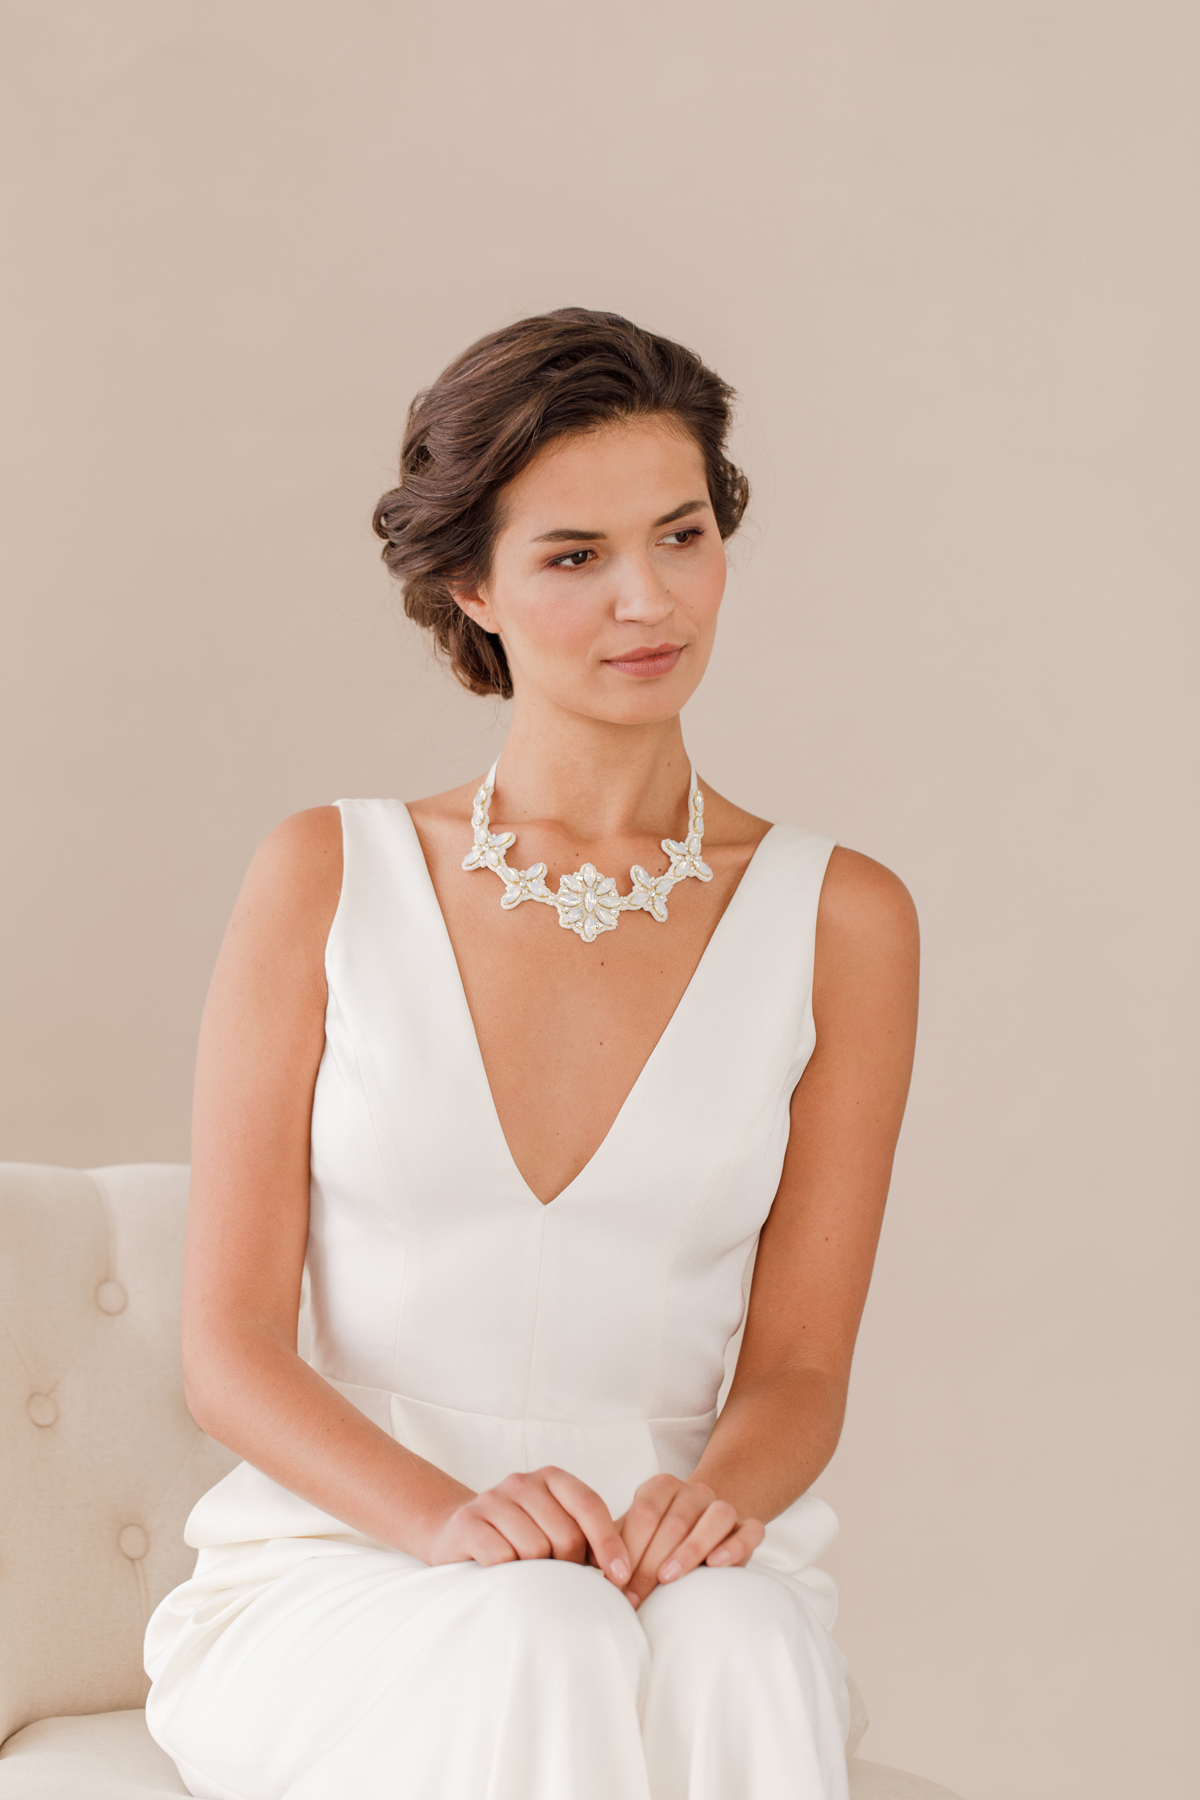 Christy - opal crystal and pearl necklace. Dress by Charlie Brear